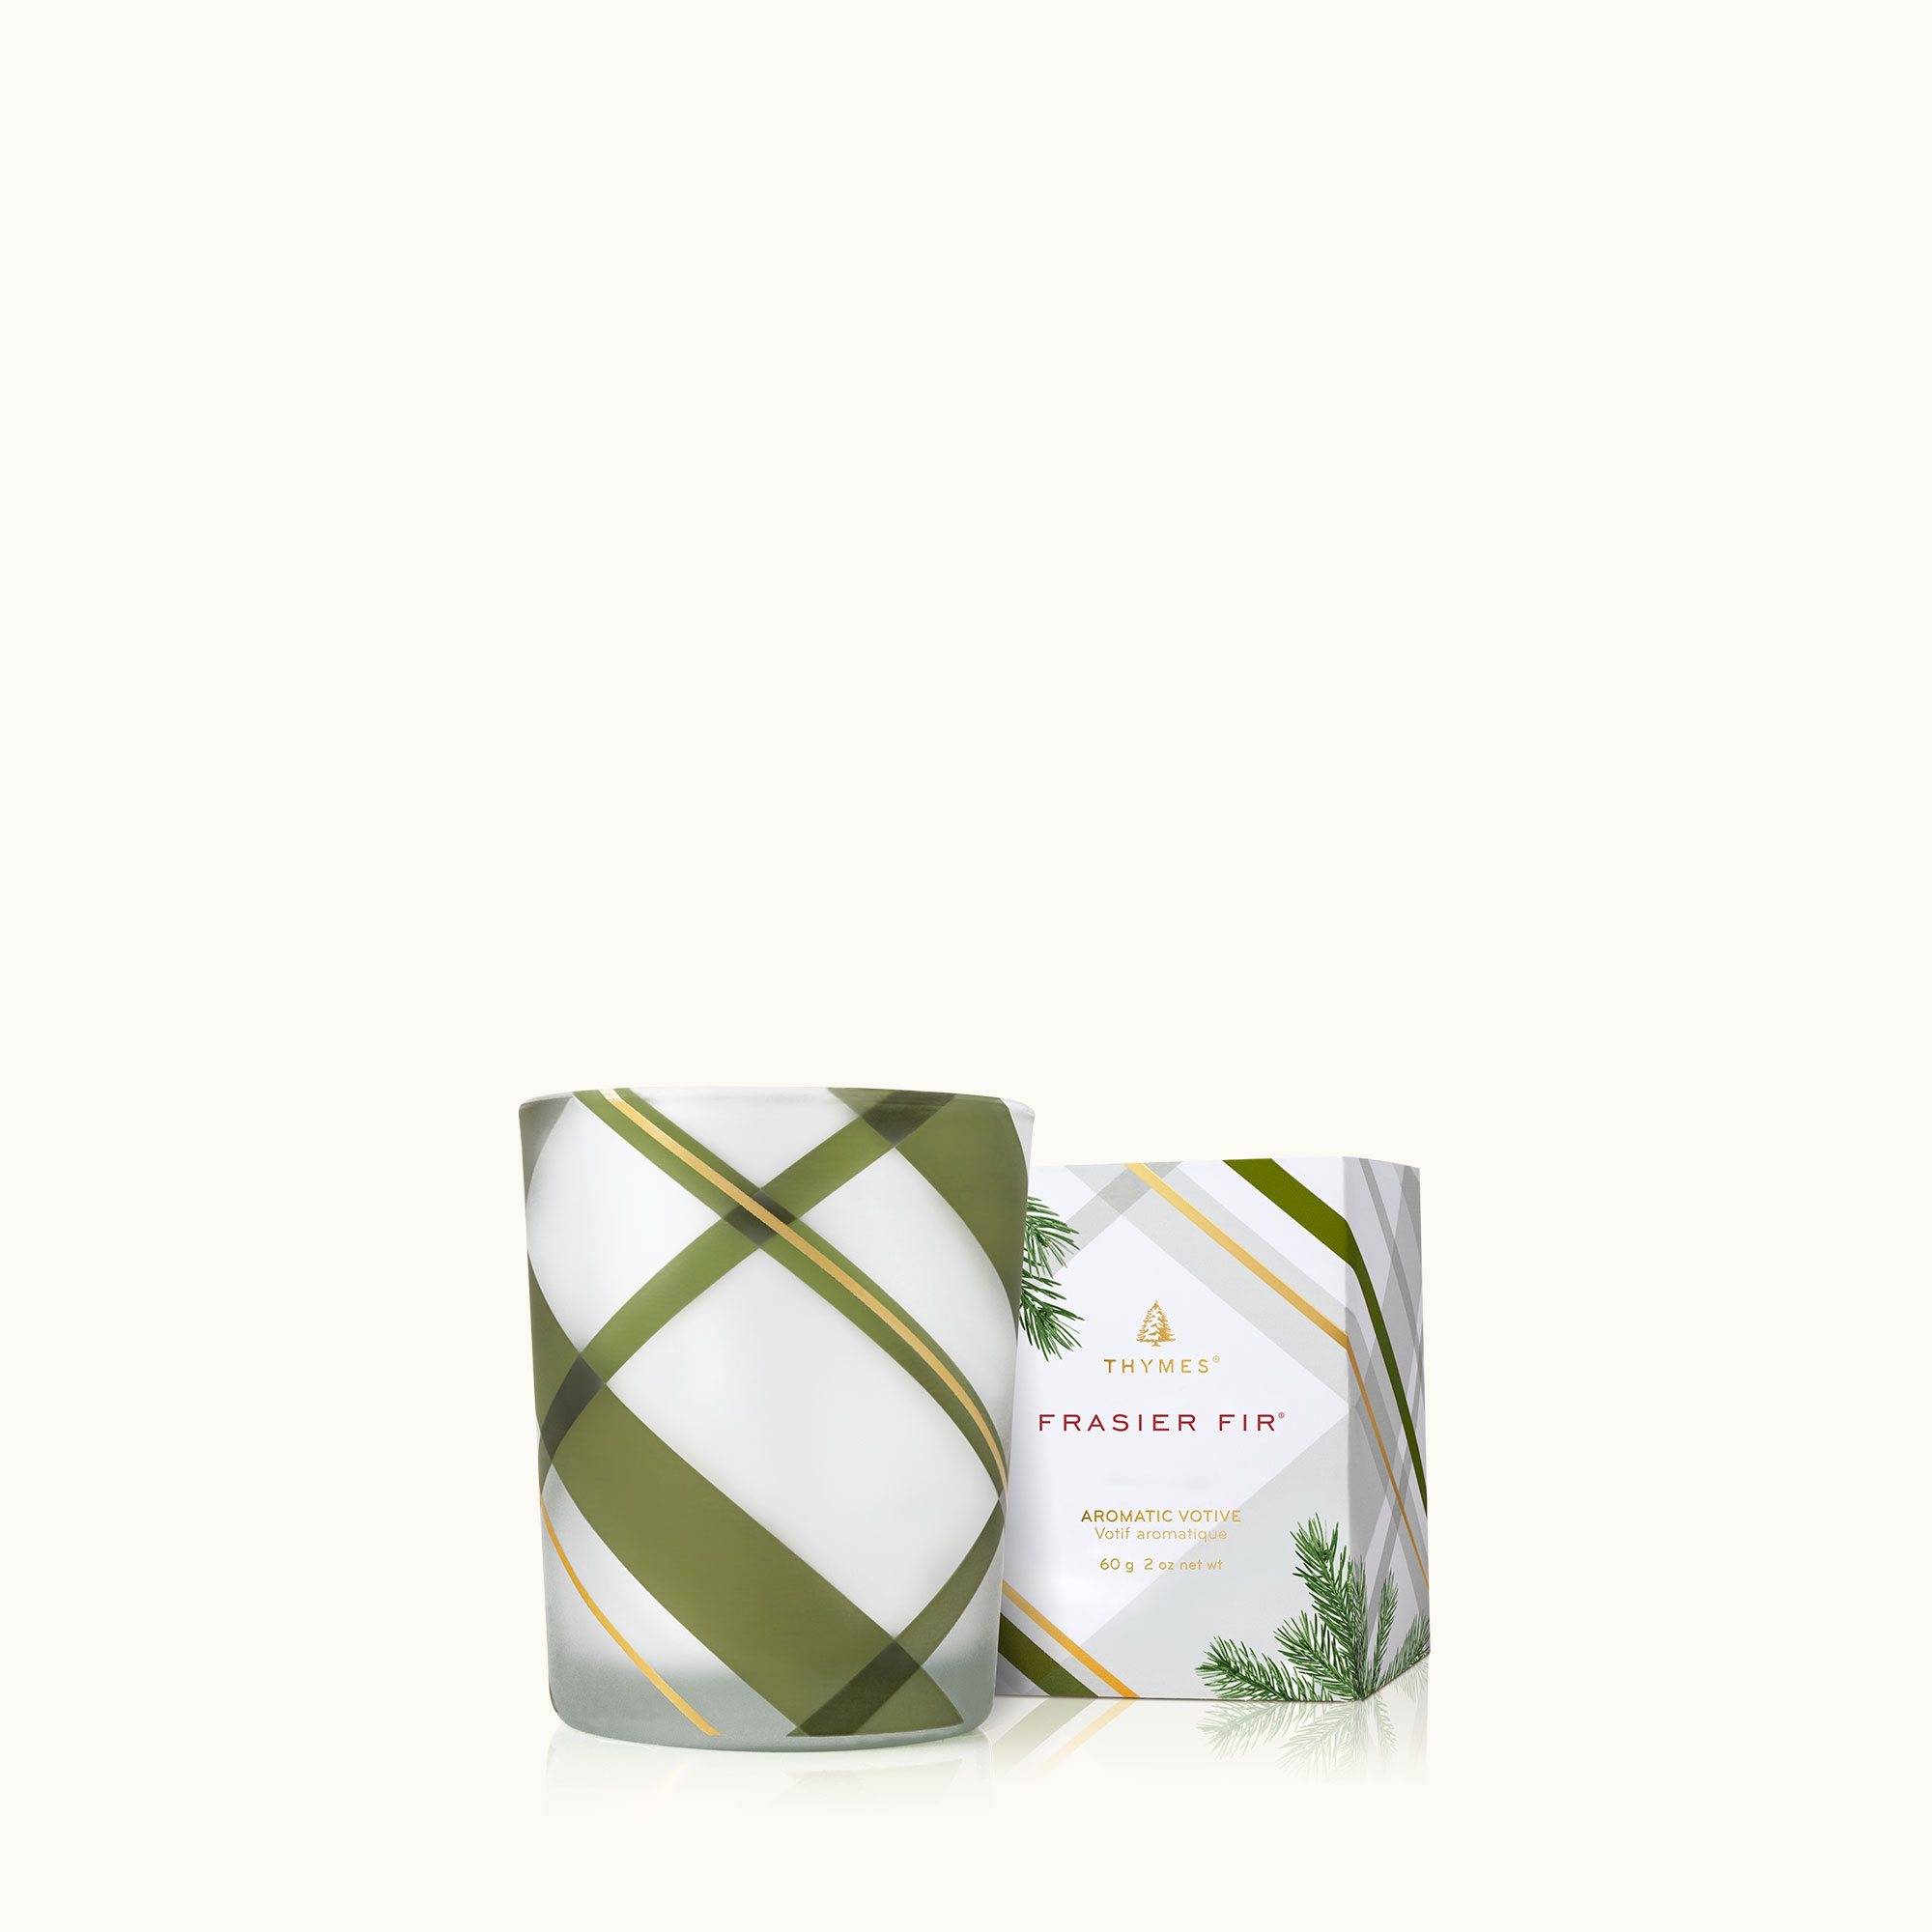 Frasier Fir FROSTED PLAID CANDLE SET – Whale's Tale & Splash Gallery